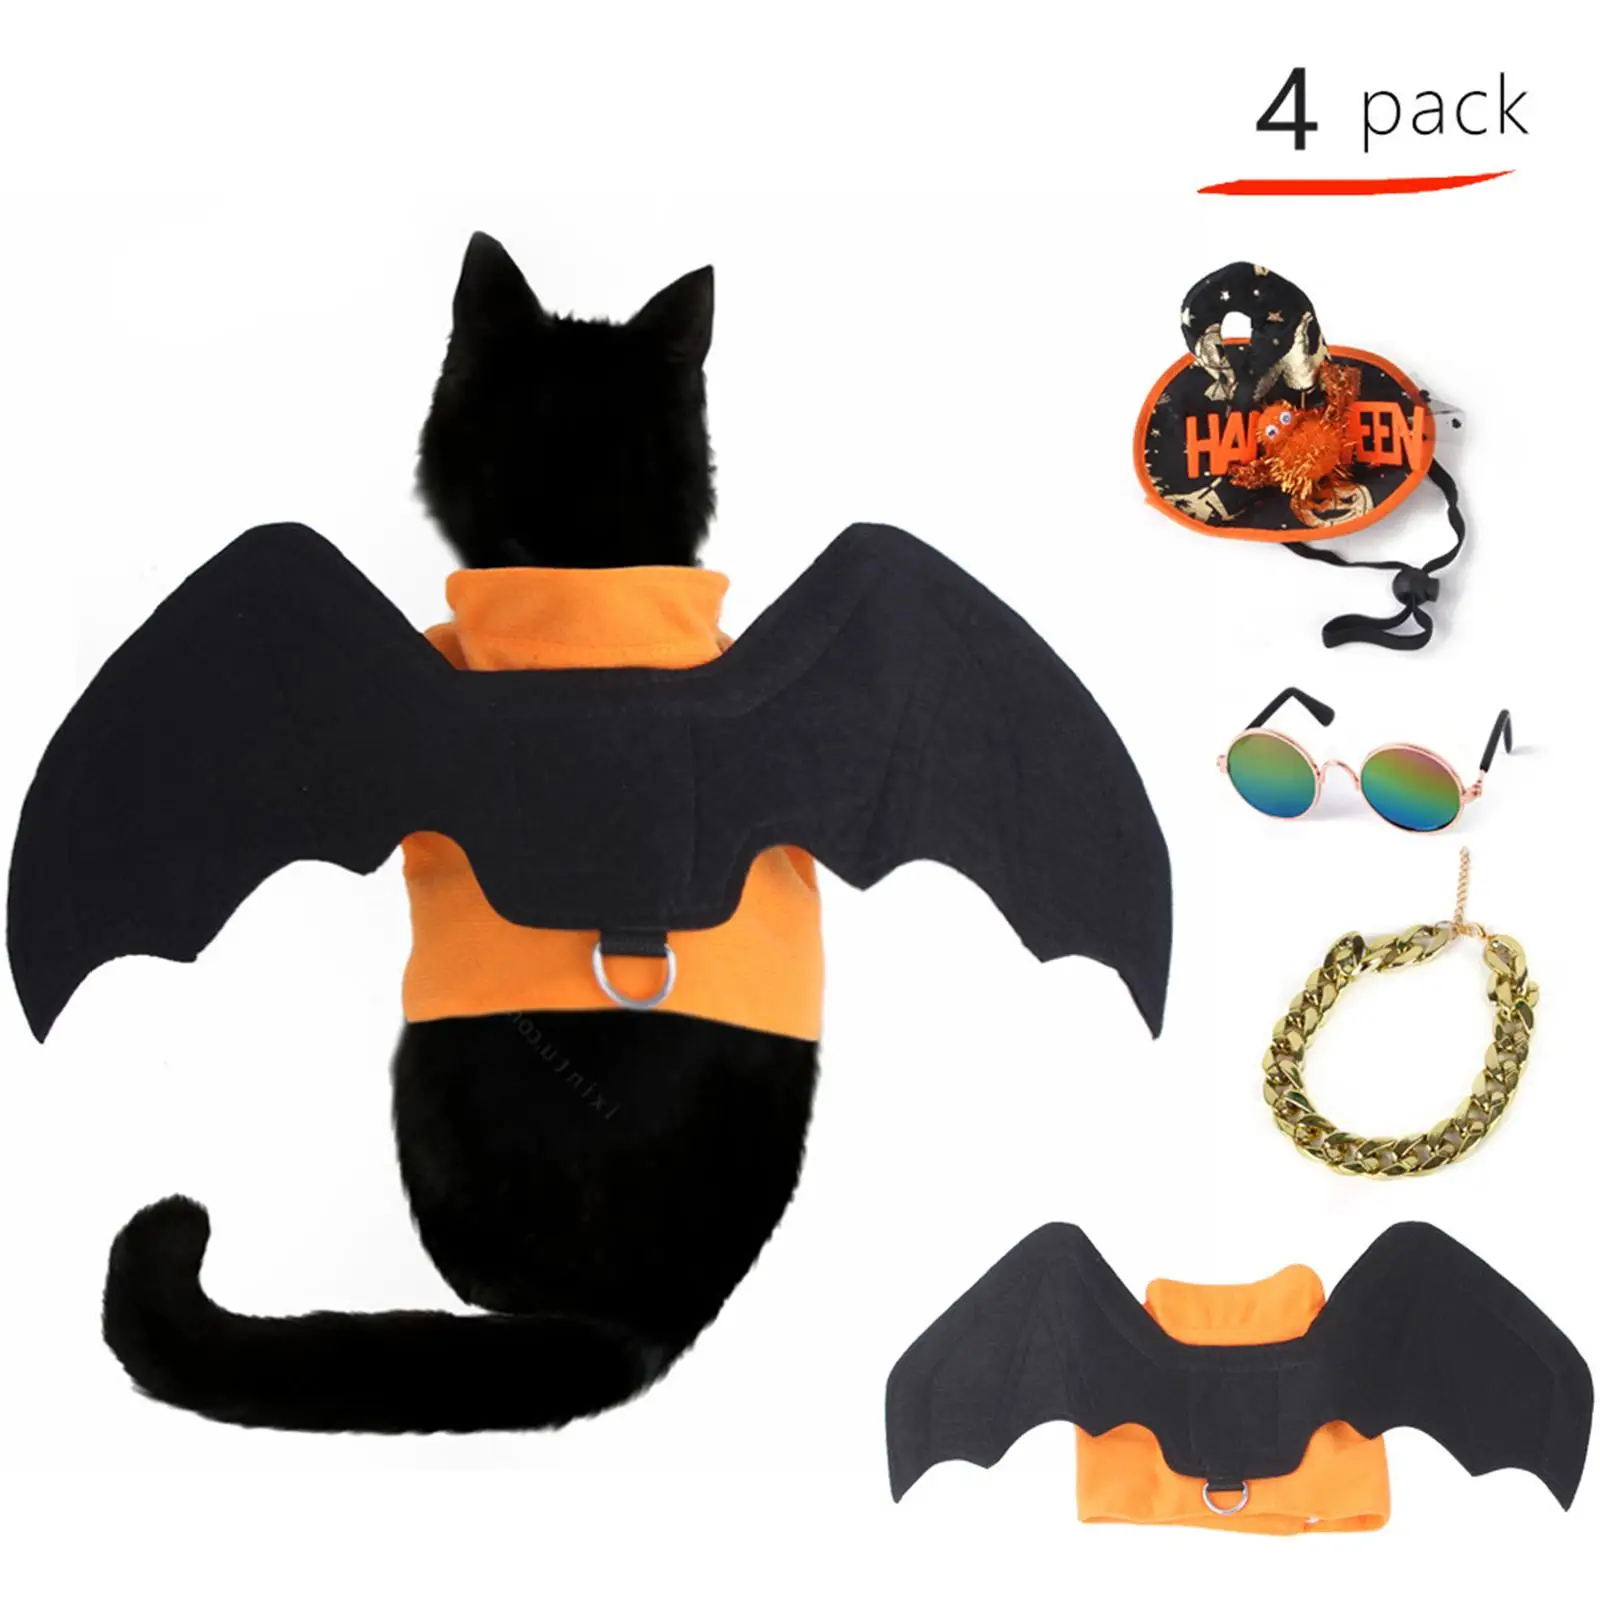 4x Adjustable Harness Clothing Decoration Halloween Pet Costumes for Cosplay